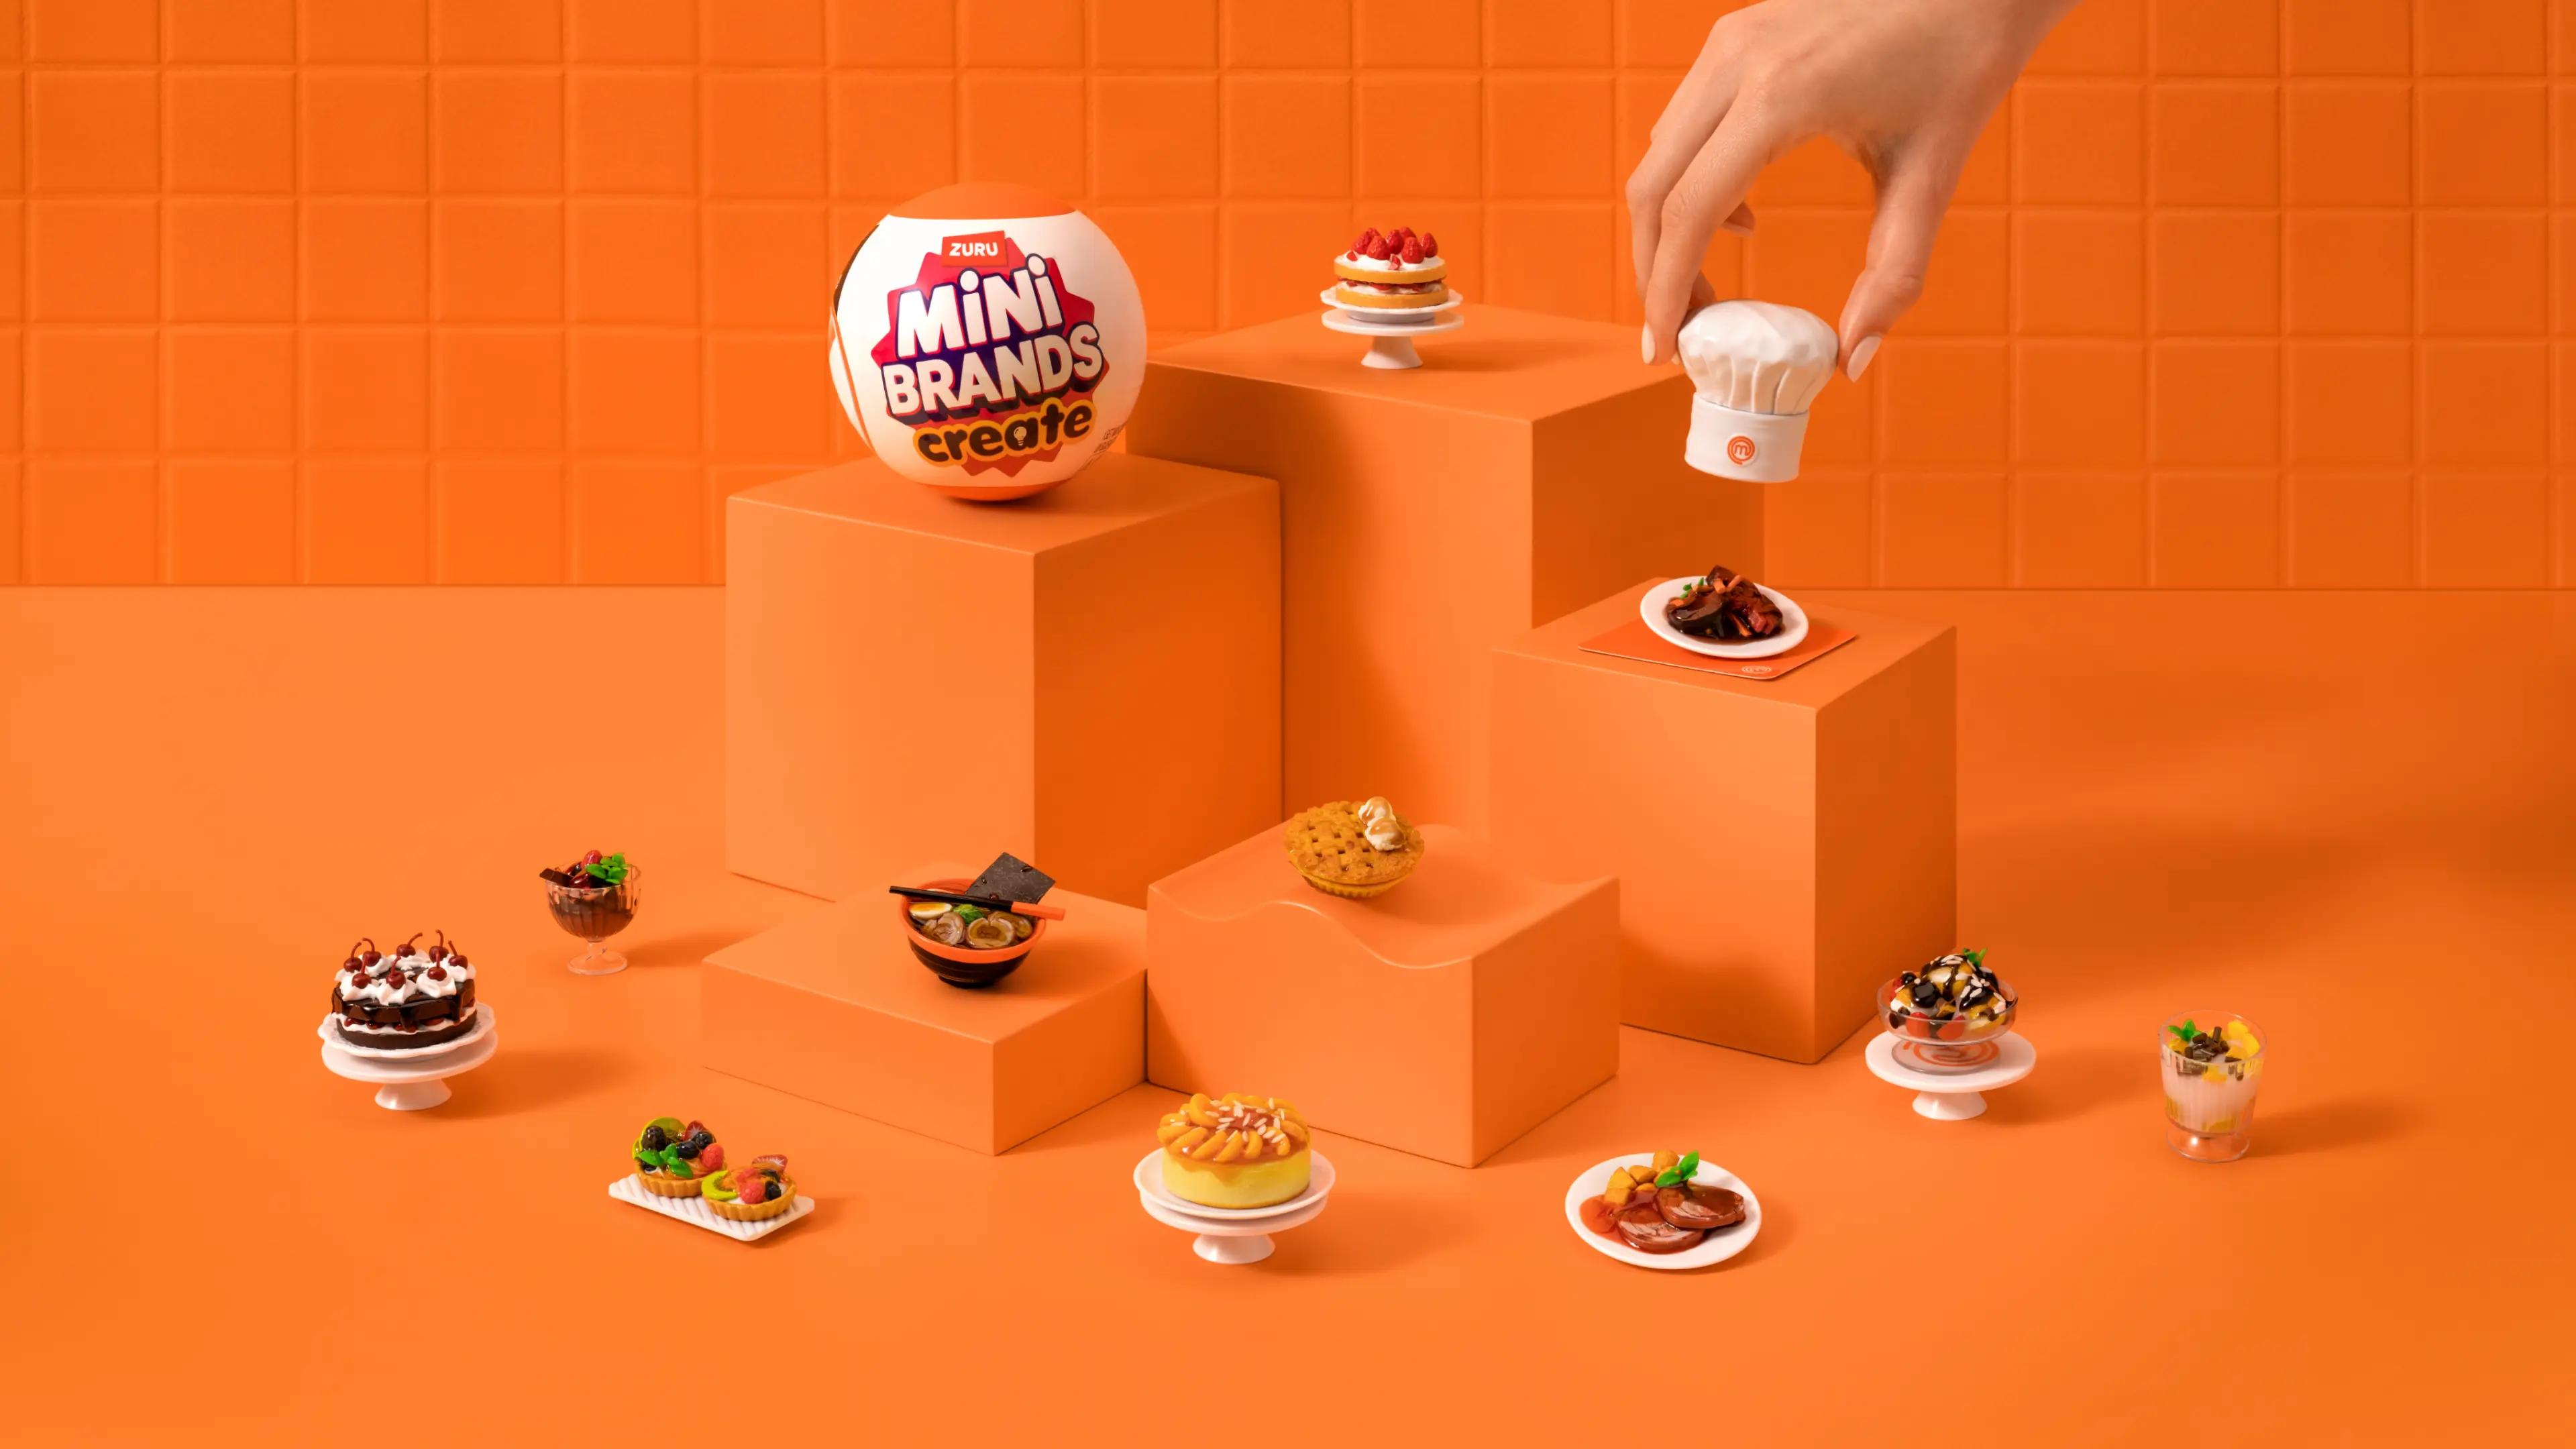 Creative display of ZURU Mini Brands MasterChef series miniatures with various miniature foods artistically arranged on different levels of orange blocks, showcasing the collectible nature and culinary theme.